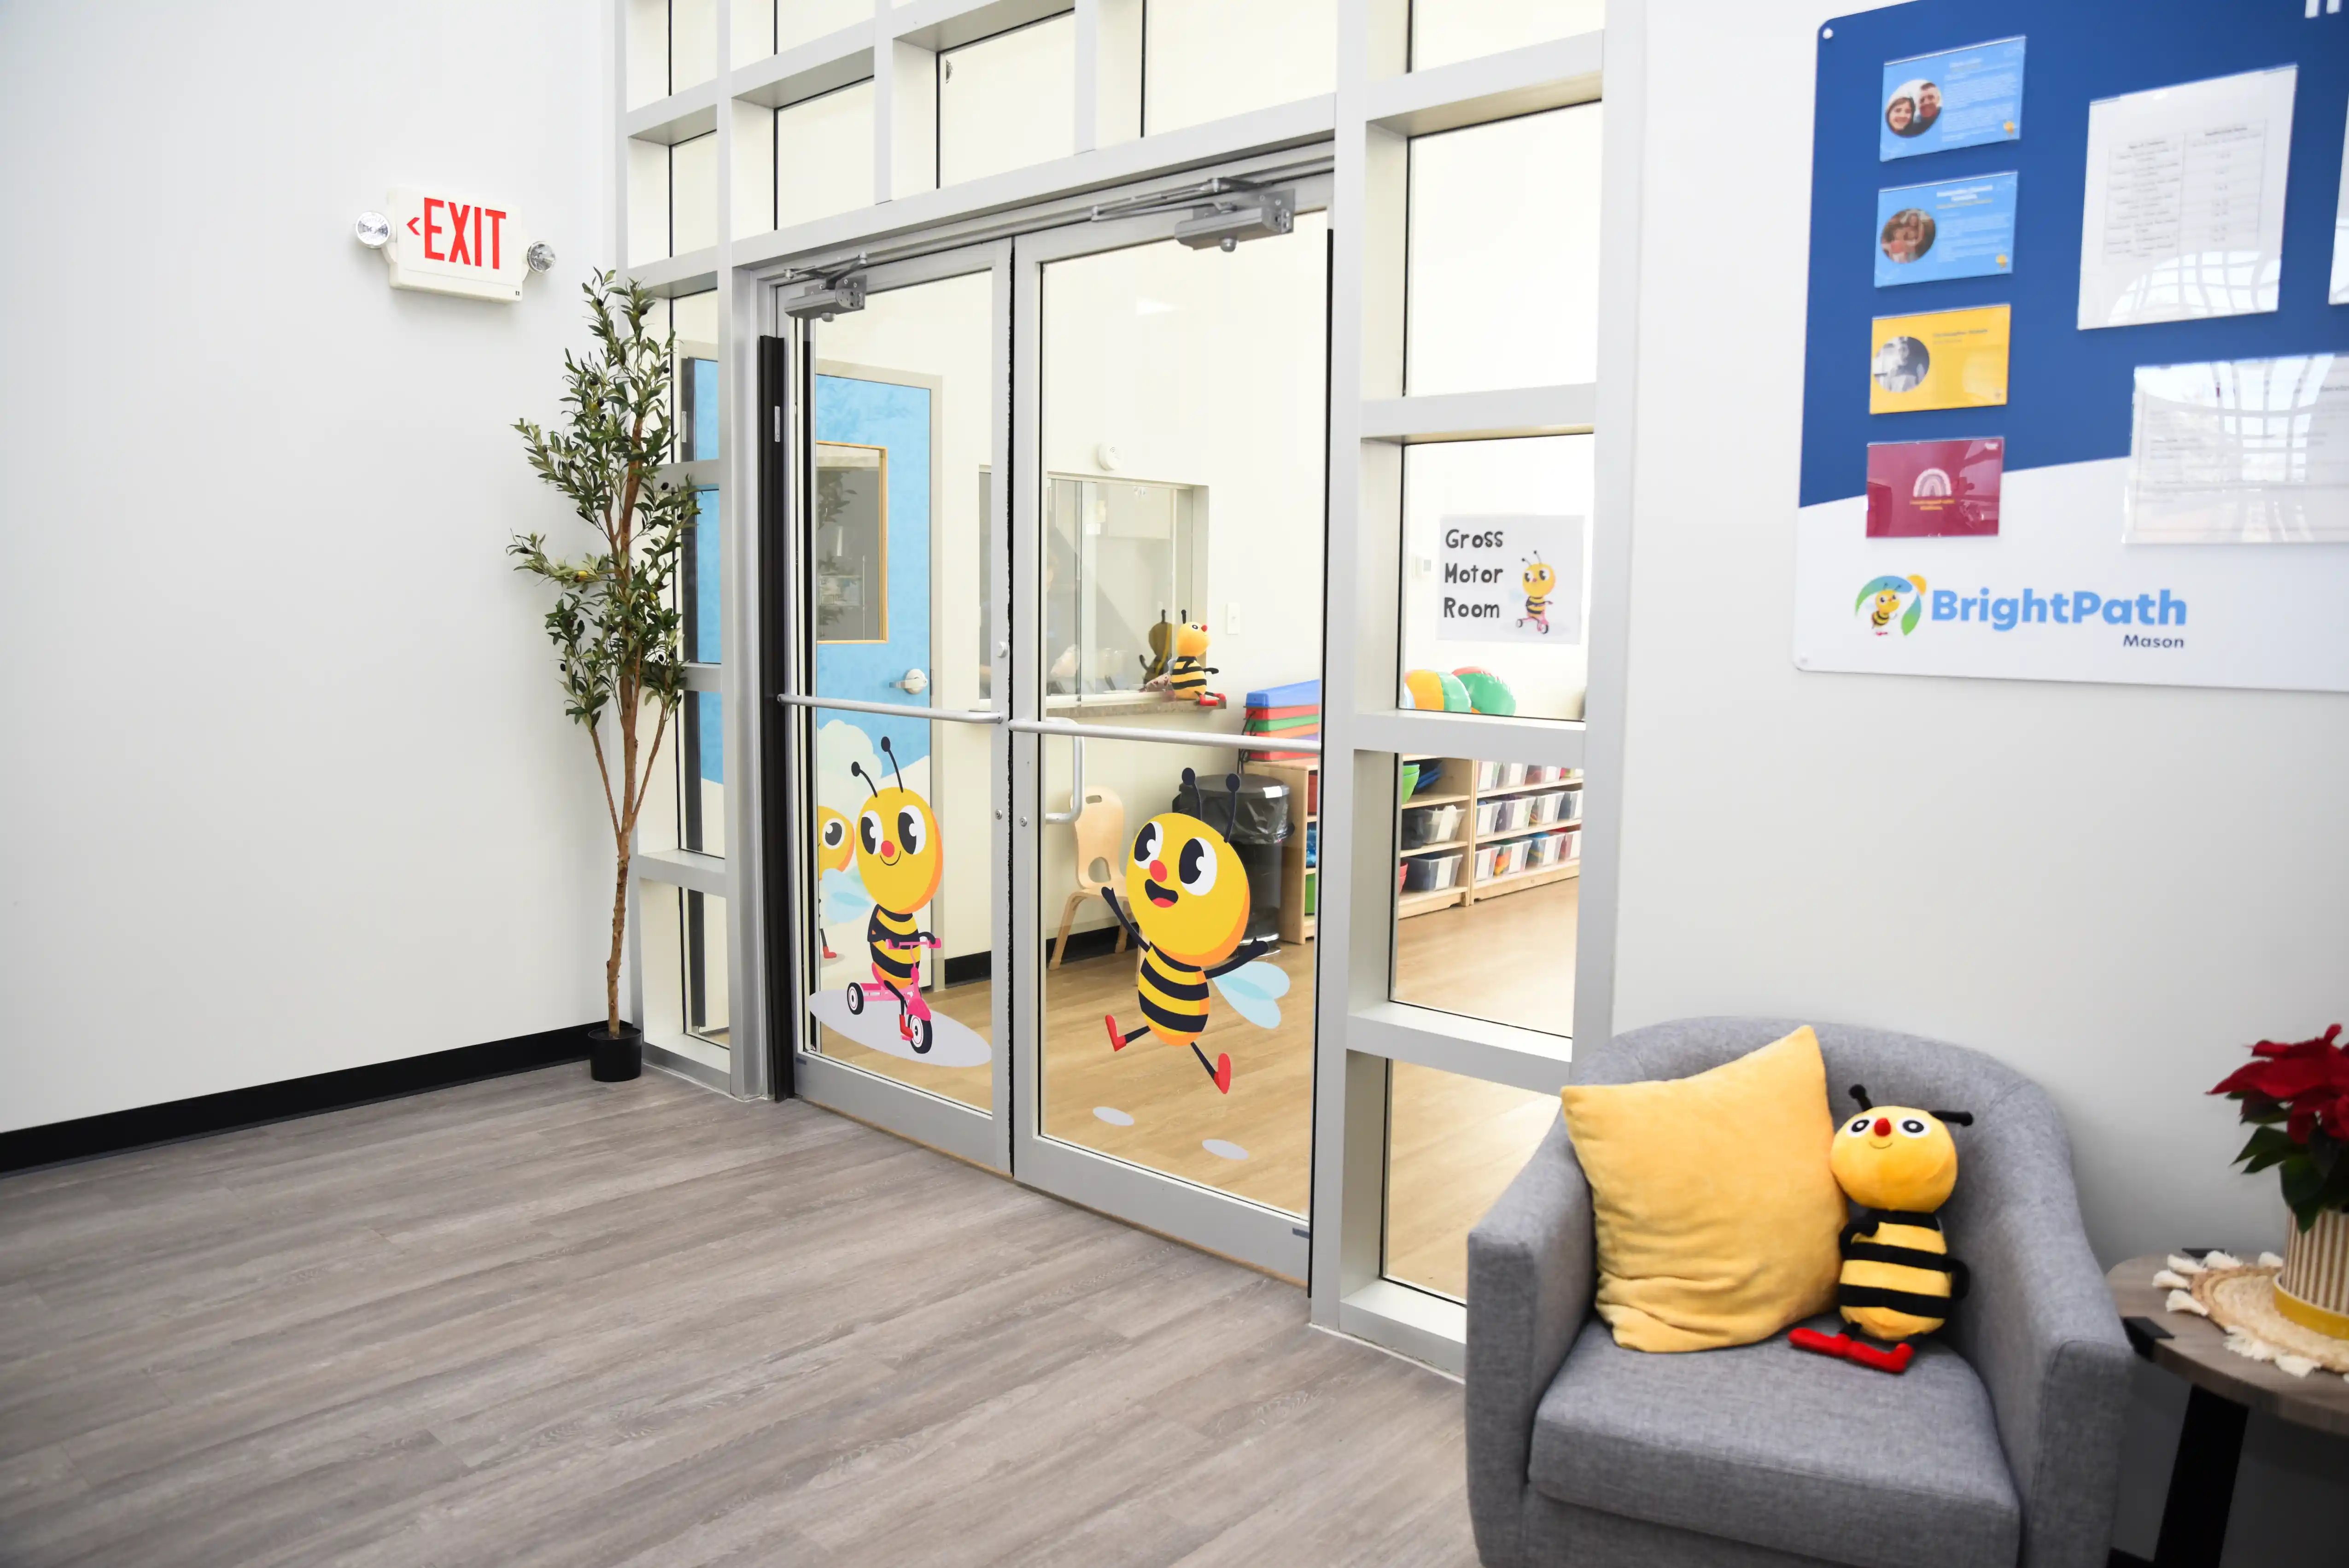 Interior of BrightPath center featuring child-friendly decor, interactive play areas, and educational resources.